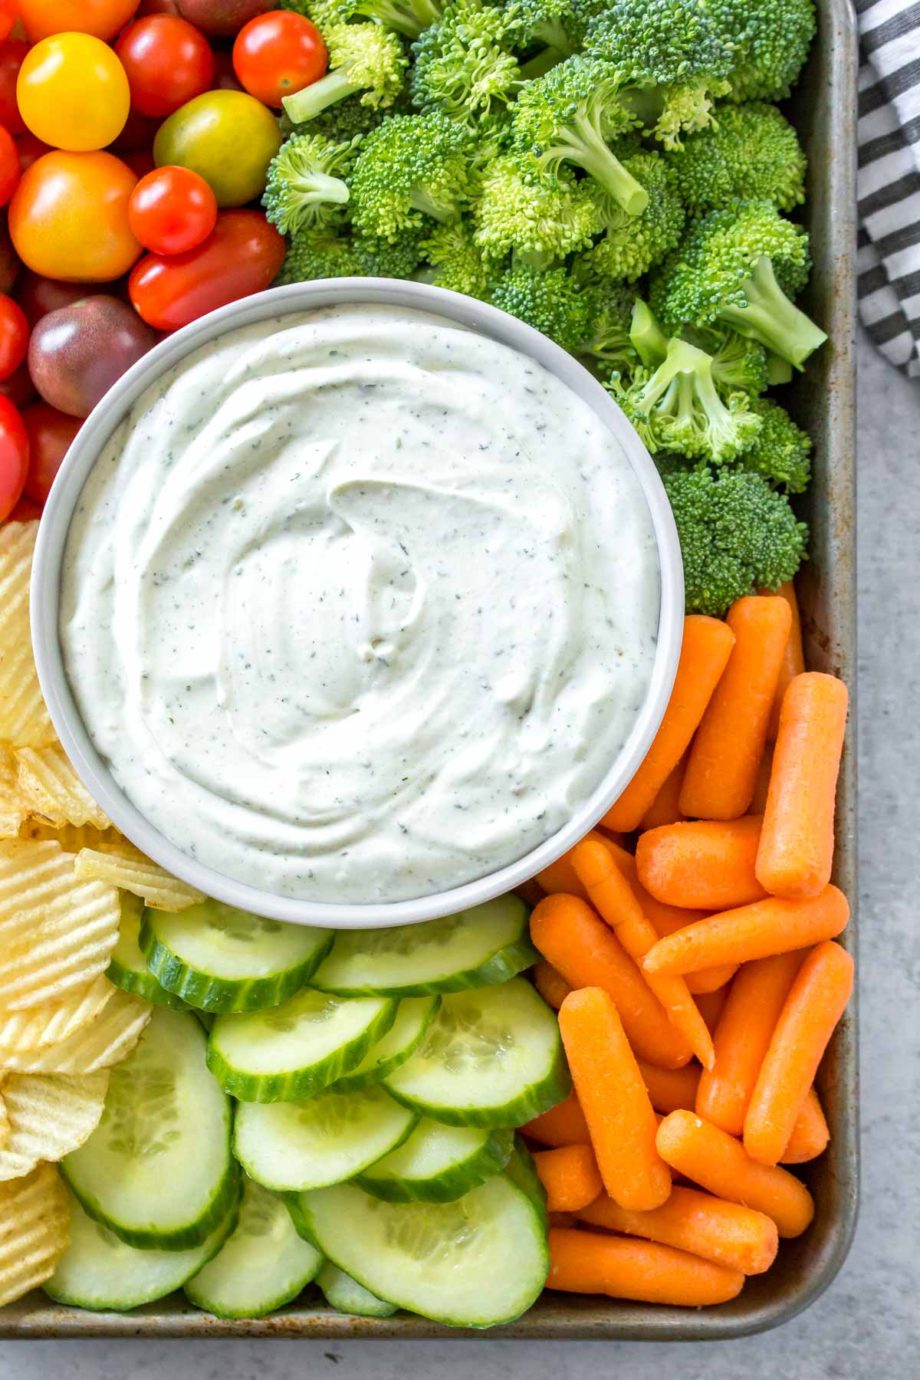 Homemade Ranch Dip Recipe (Dairy Free) - Simply Whisked